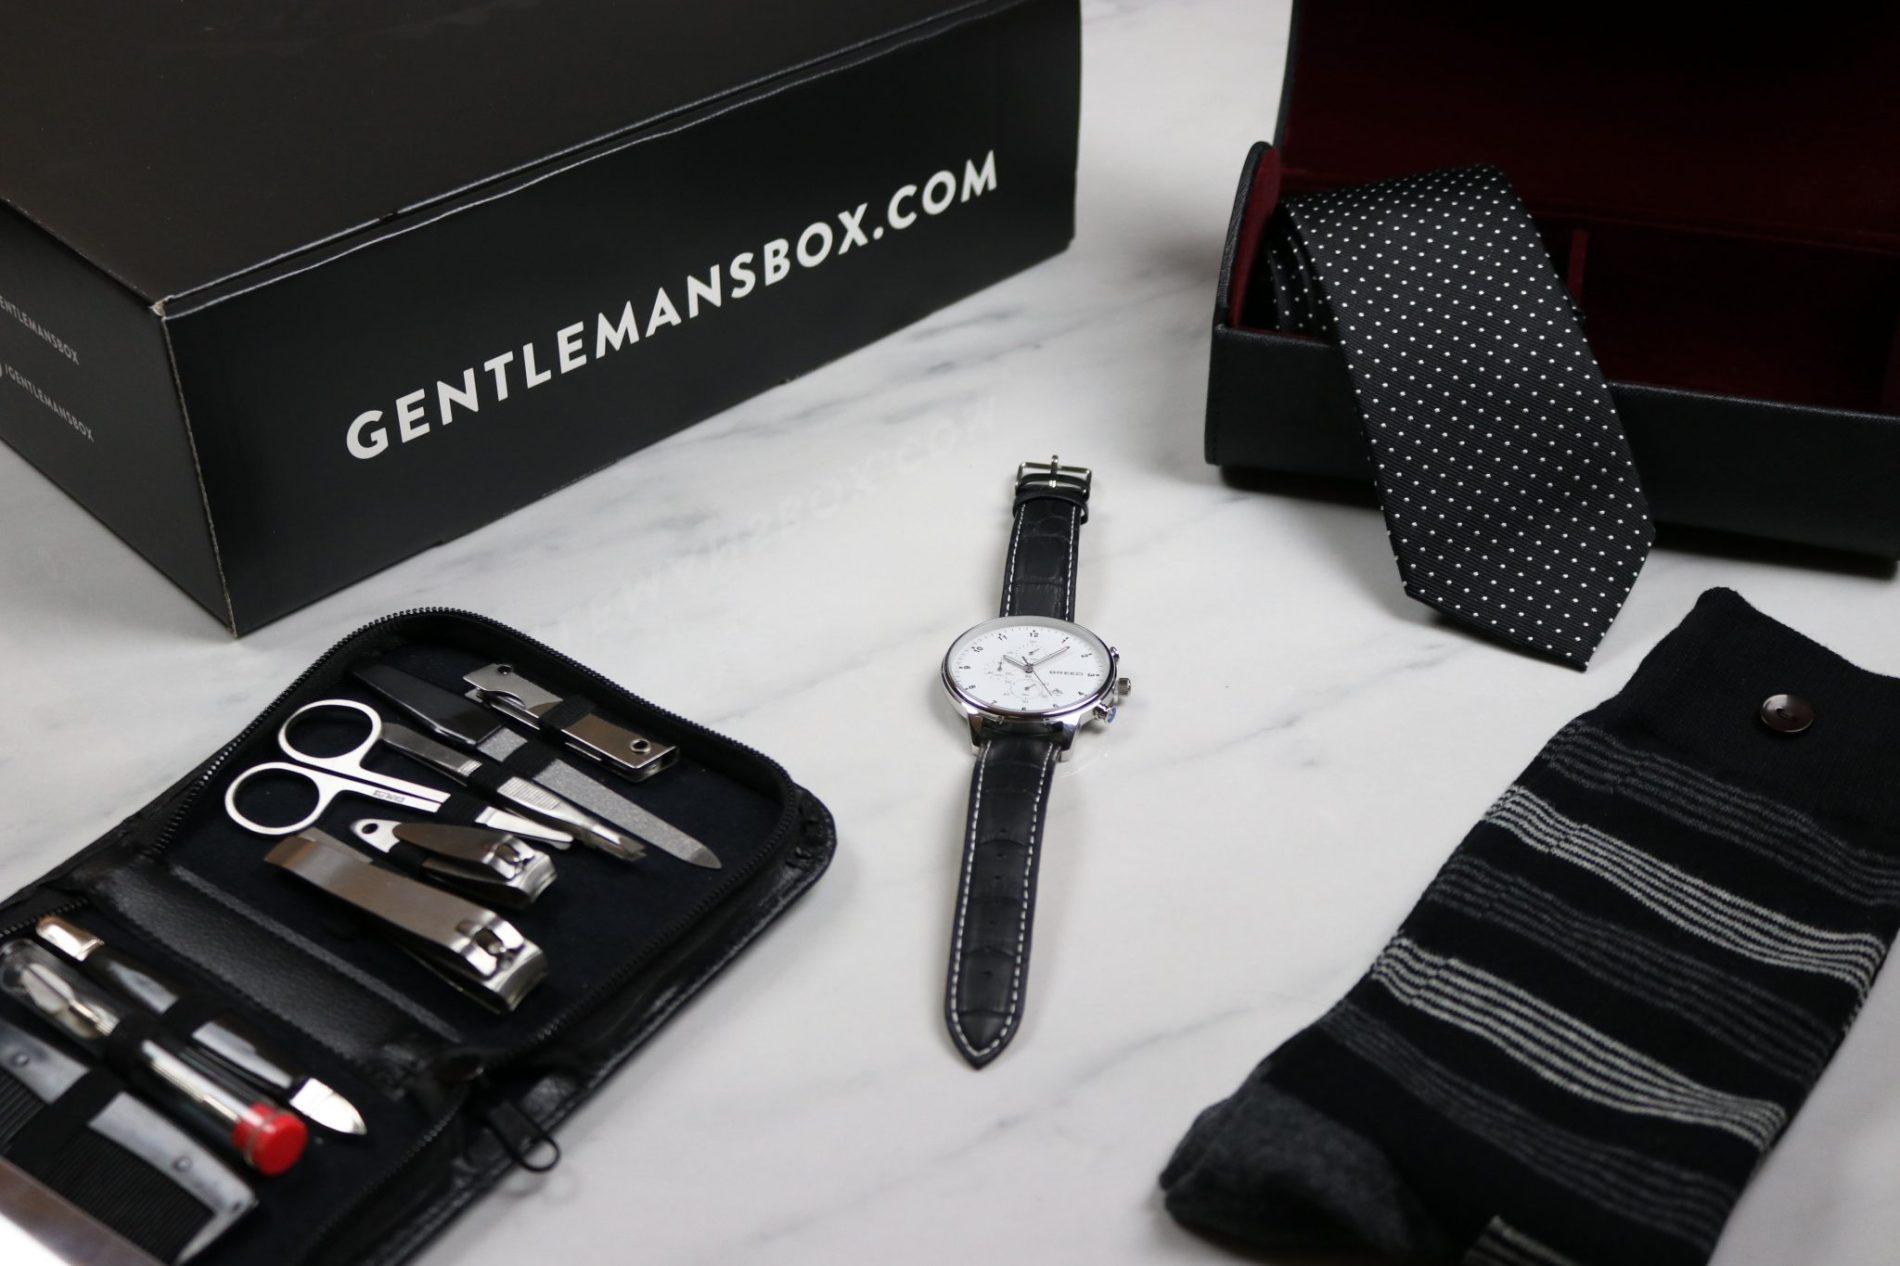 Read more about the article Gentleman’s Box Premium Box Coupon Code – Save 30%!